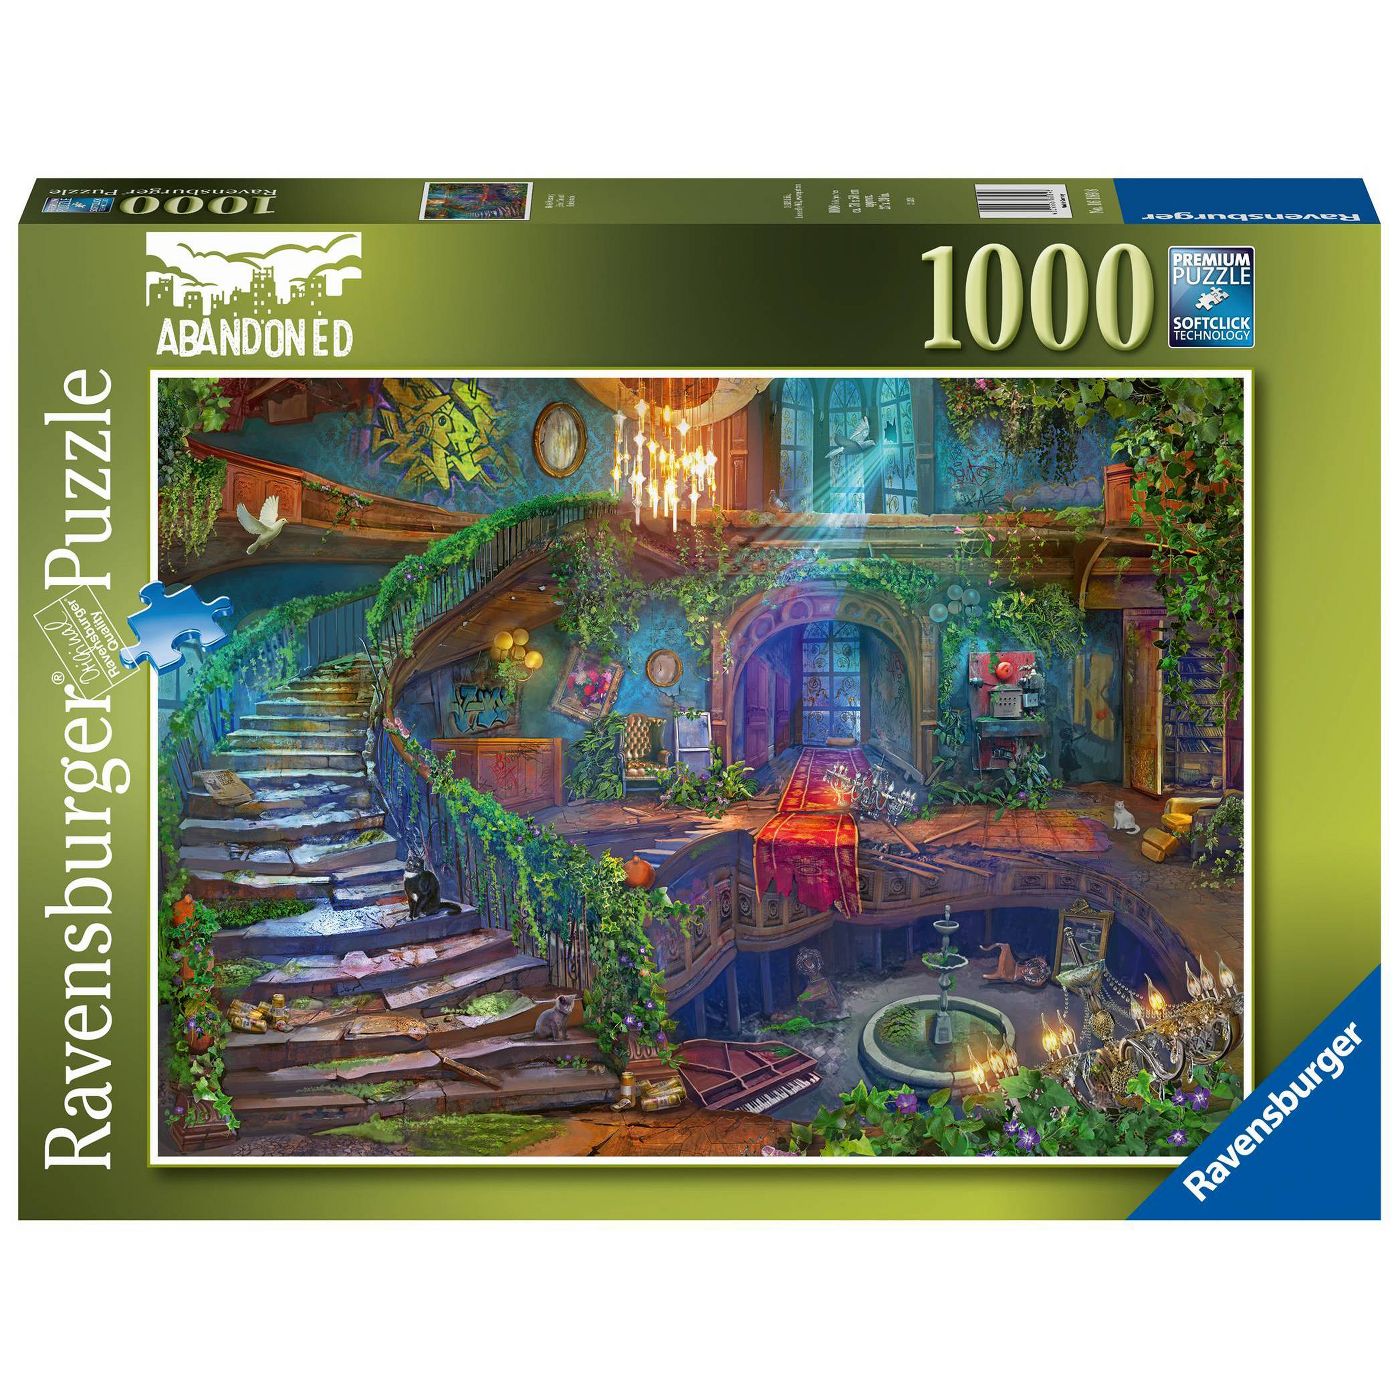 Gloomy Carnival Jigsaw Puzzle 1000pc for sale online Ravensburger Abandoned Places 